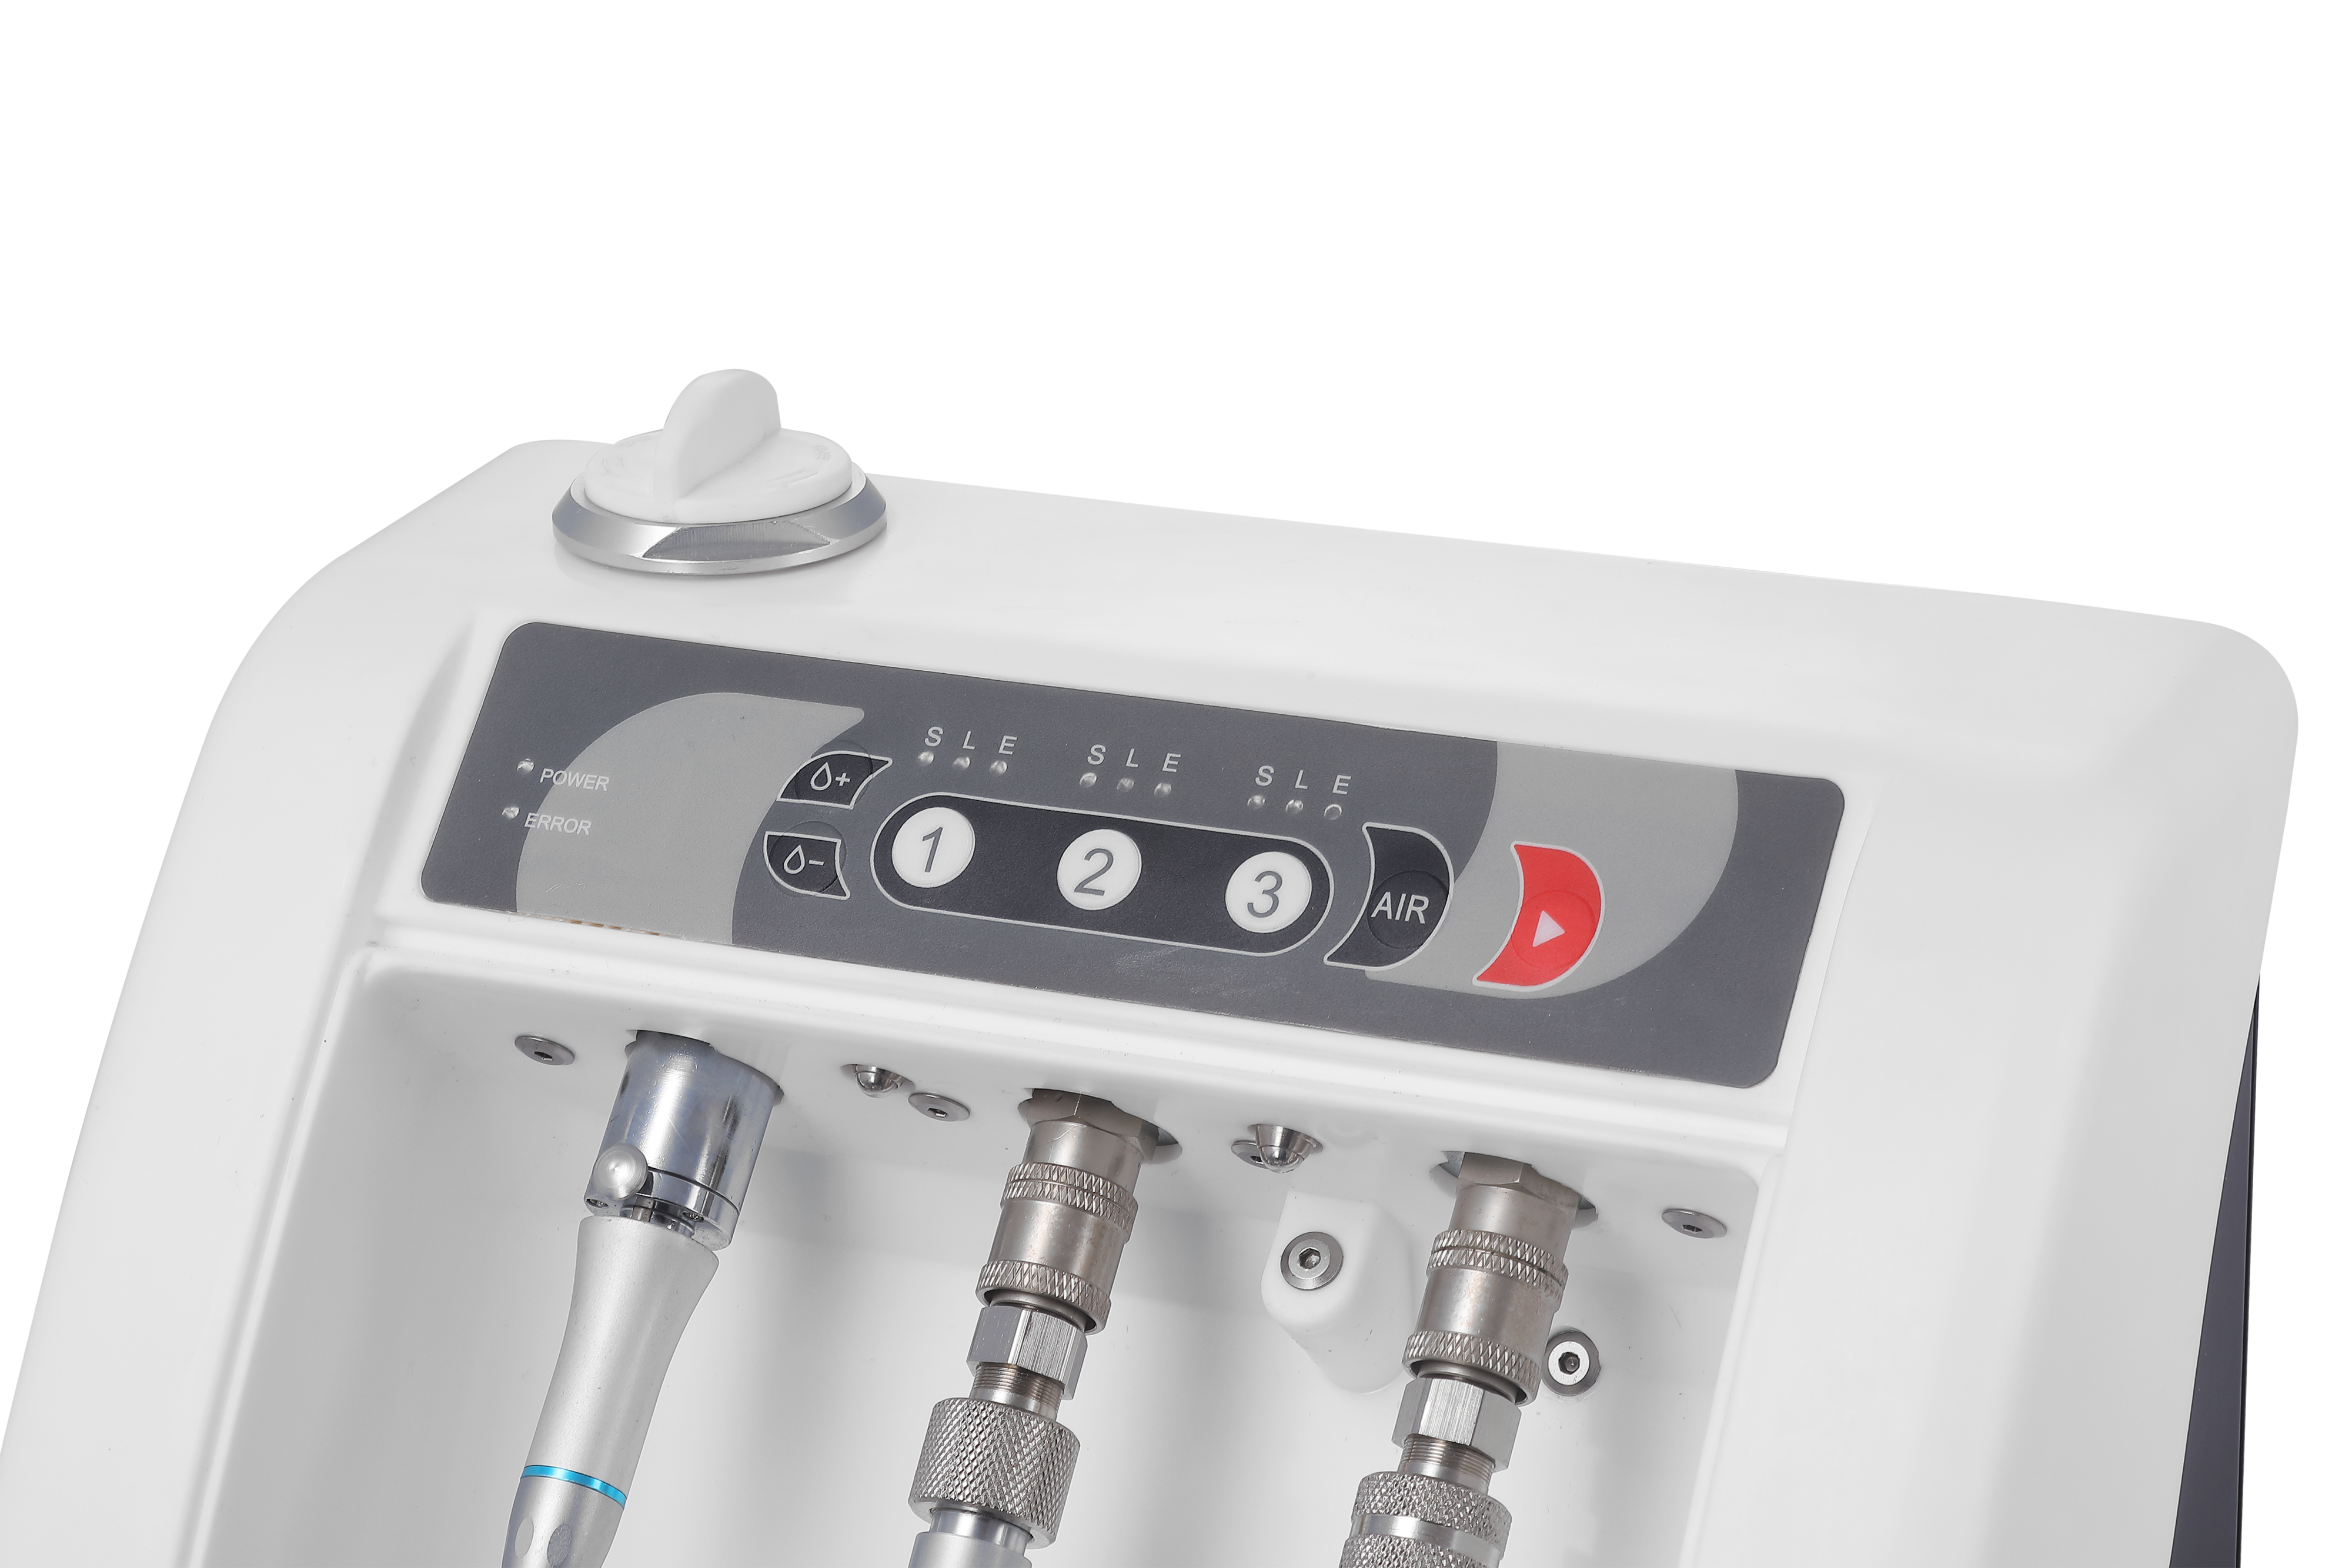 Oral Surgery Pvc Easy-coupling Handpiece Lubricating Machine